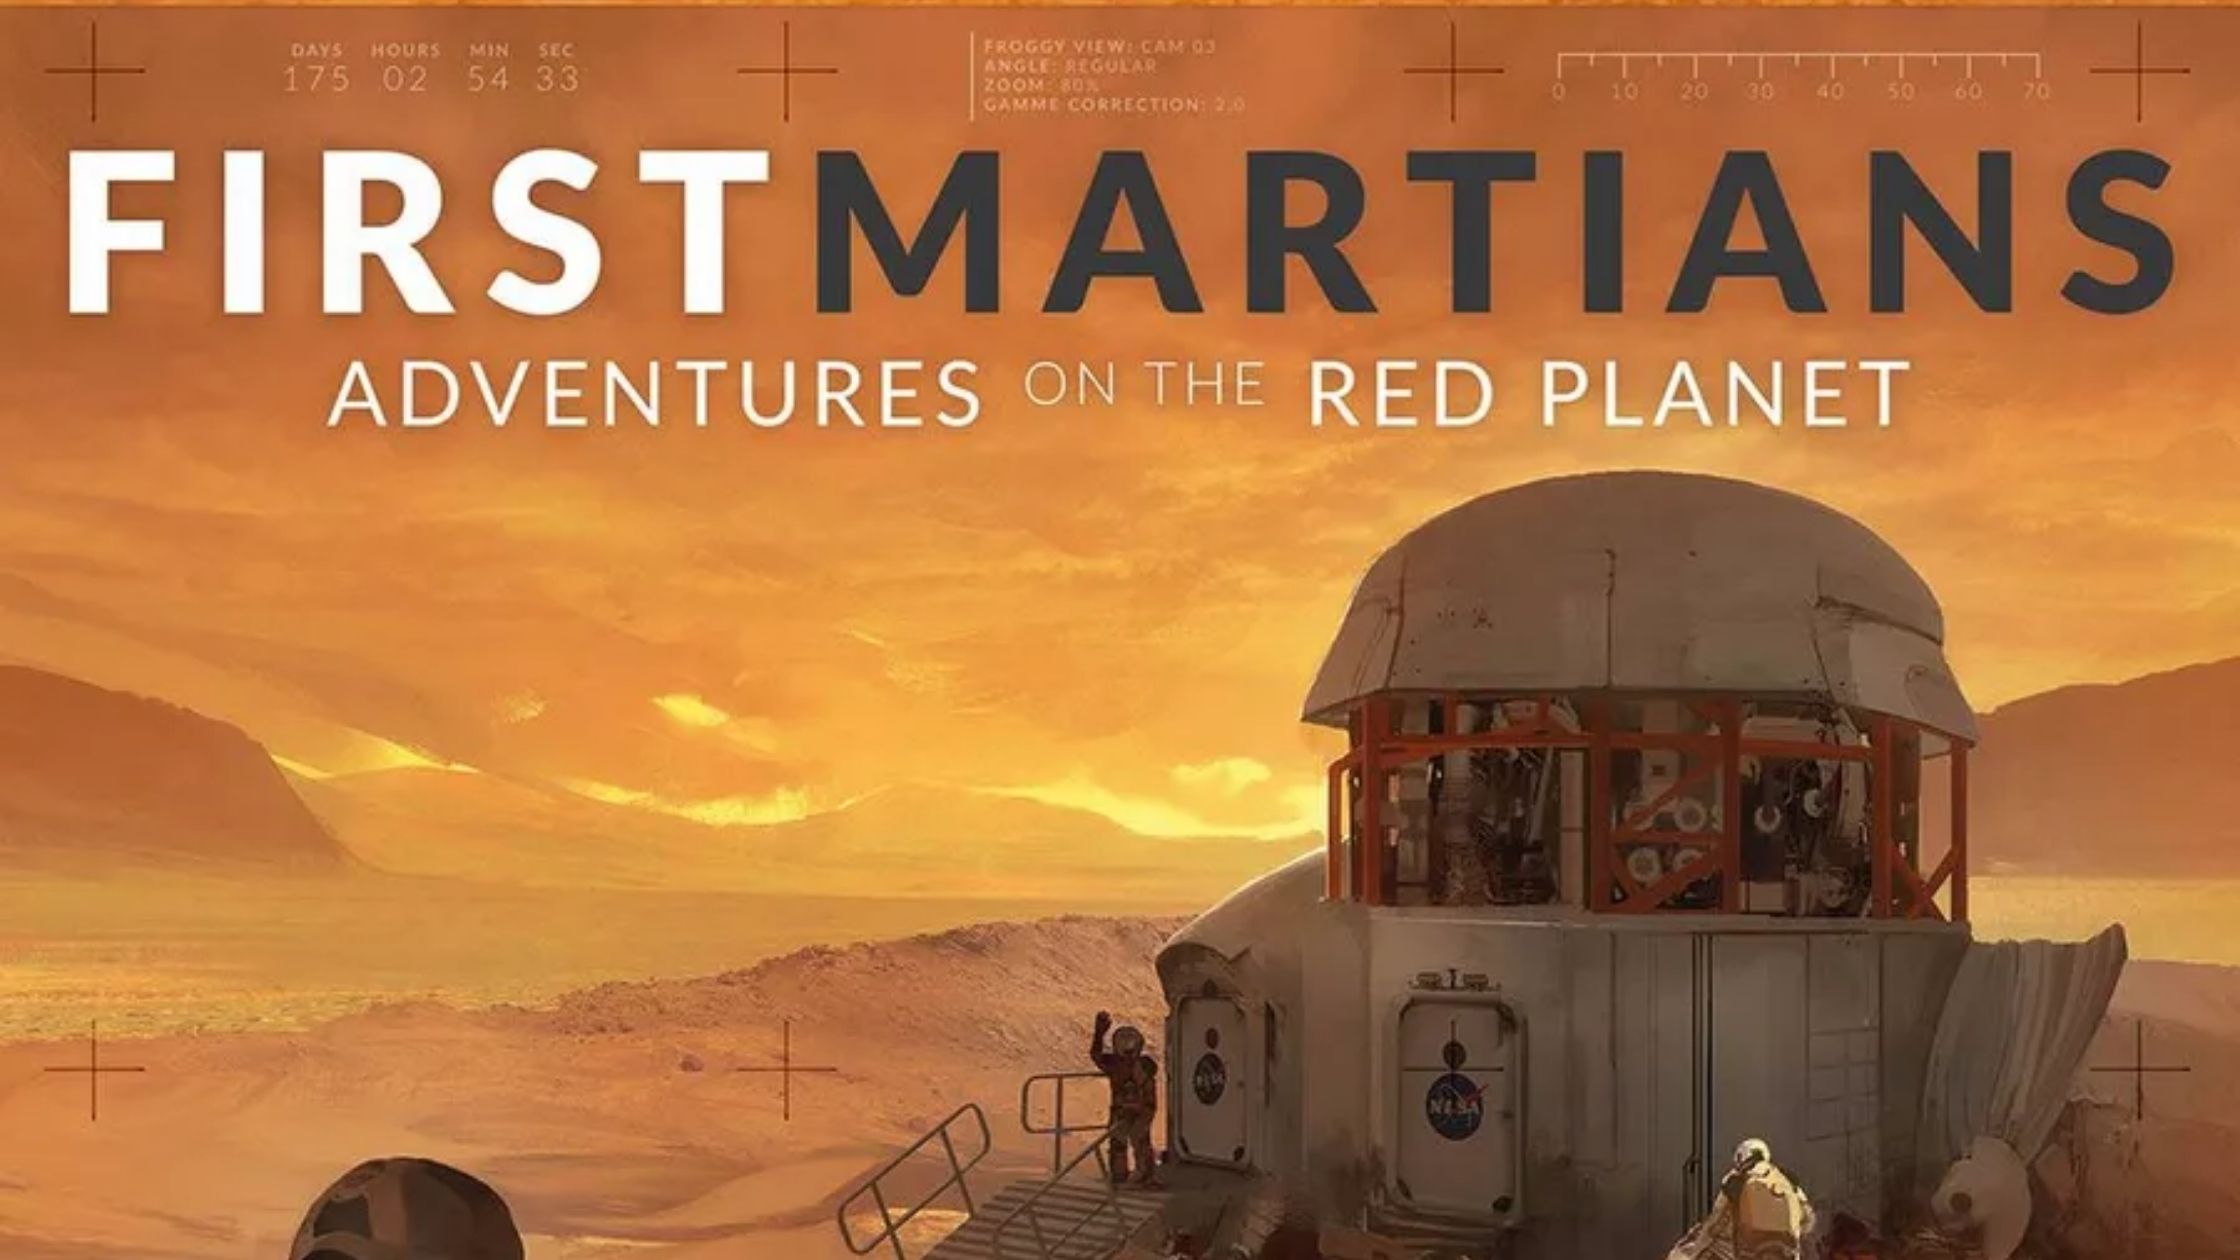 A legacy board game titled First Martians: Adventures on the Red Planet